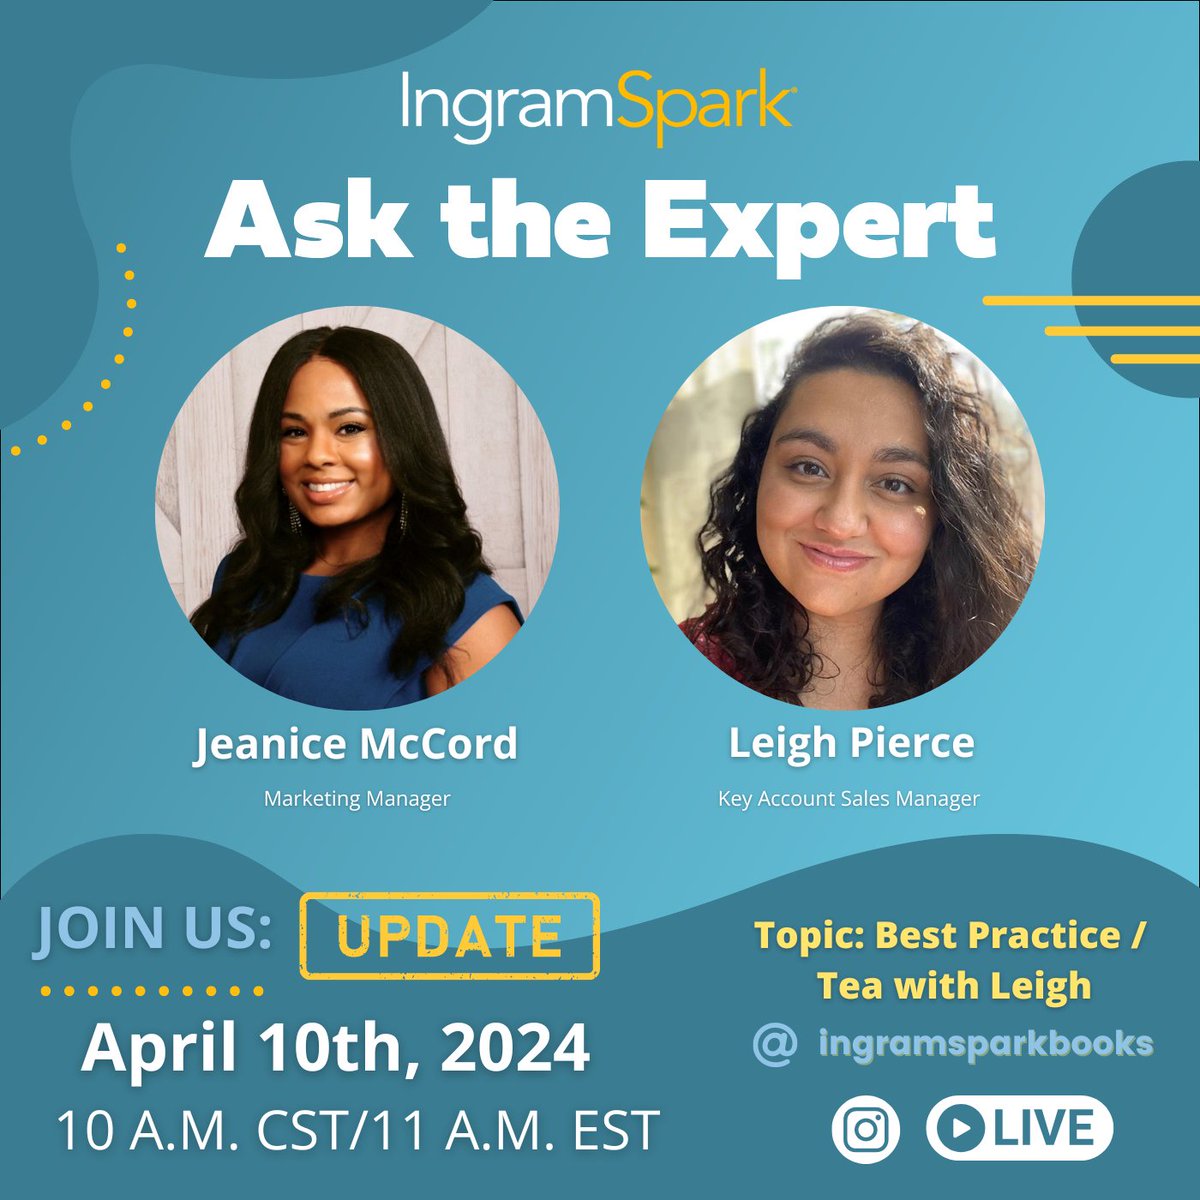 🗣️NEW DATE! Join us on Wed., April 10th, at 10 A.M. CST for the 3RD episode of ASK THE EXPERT! ✨We're also giving away free gifts! You don't want to miss this! 📆Mark your calendar for April 10th, 2024 @ 10 A.M. ✨Can't watch? We'll upload the video to IG reels afterward!